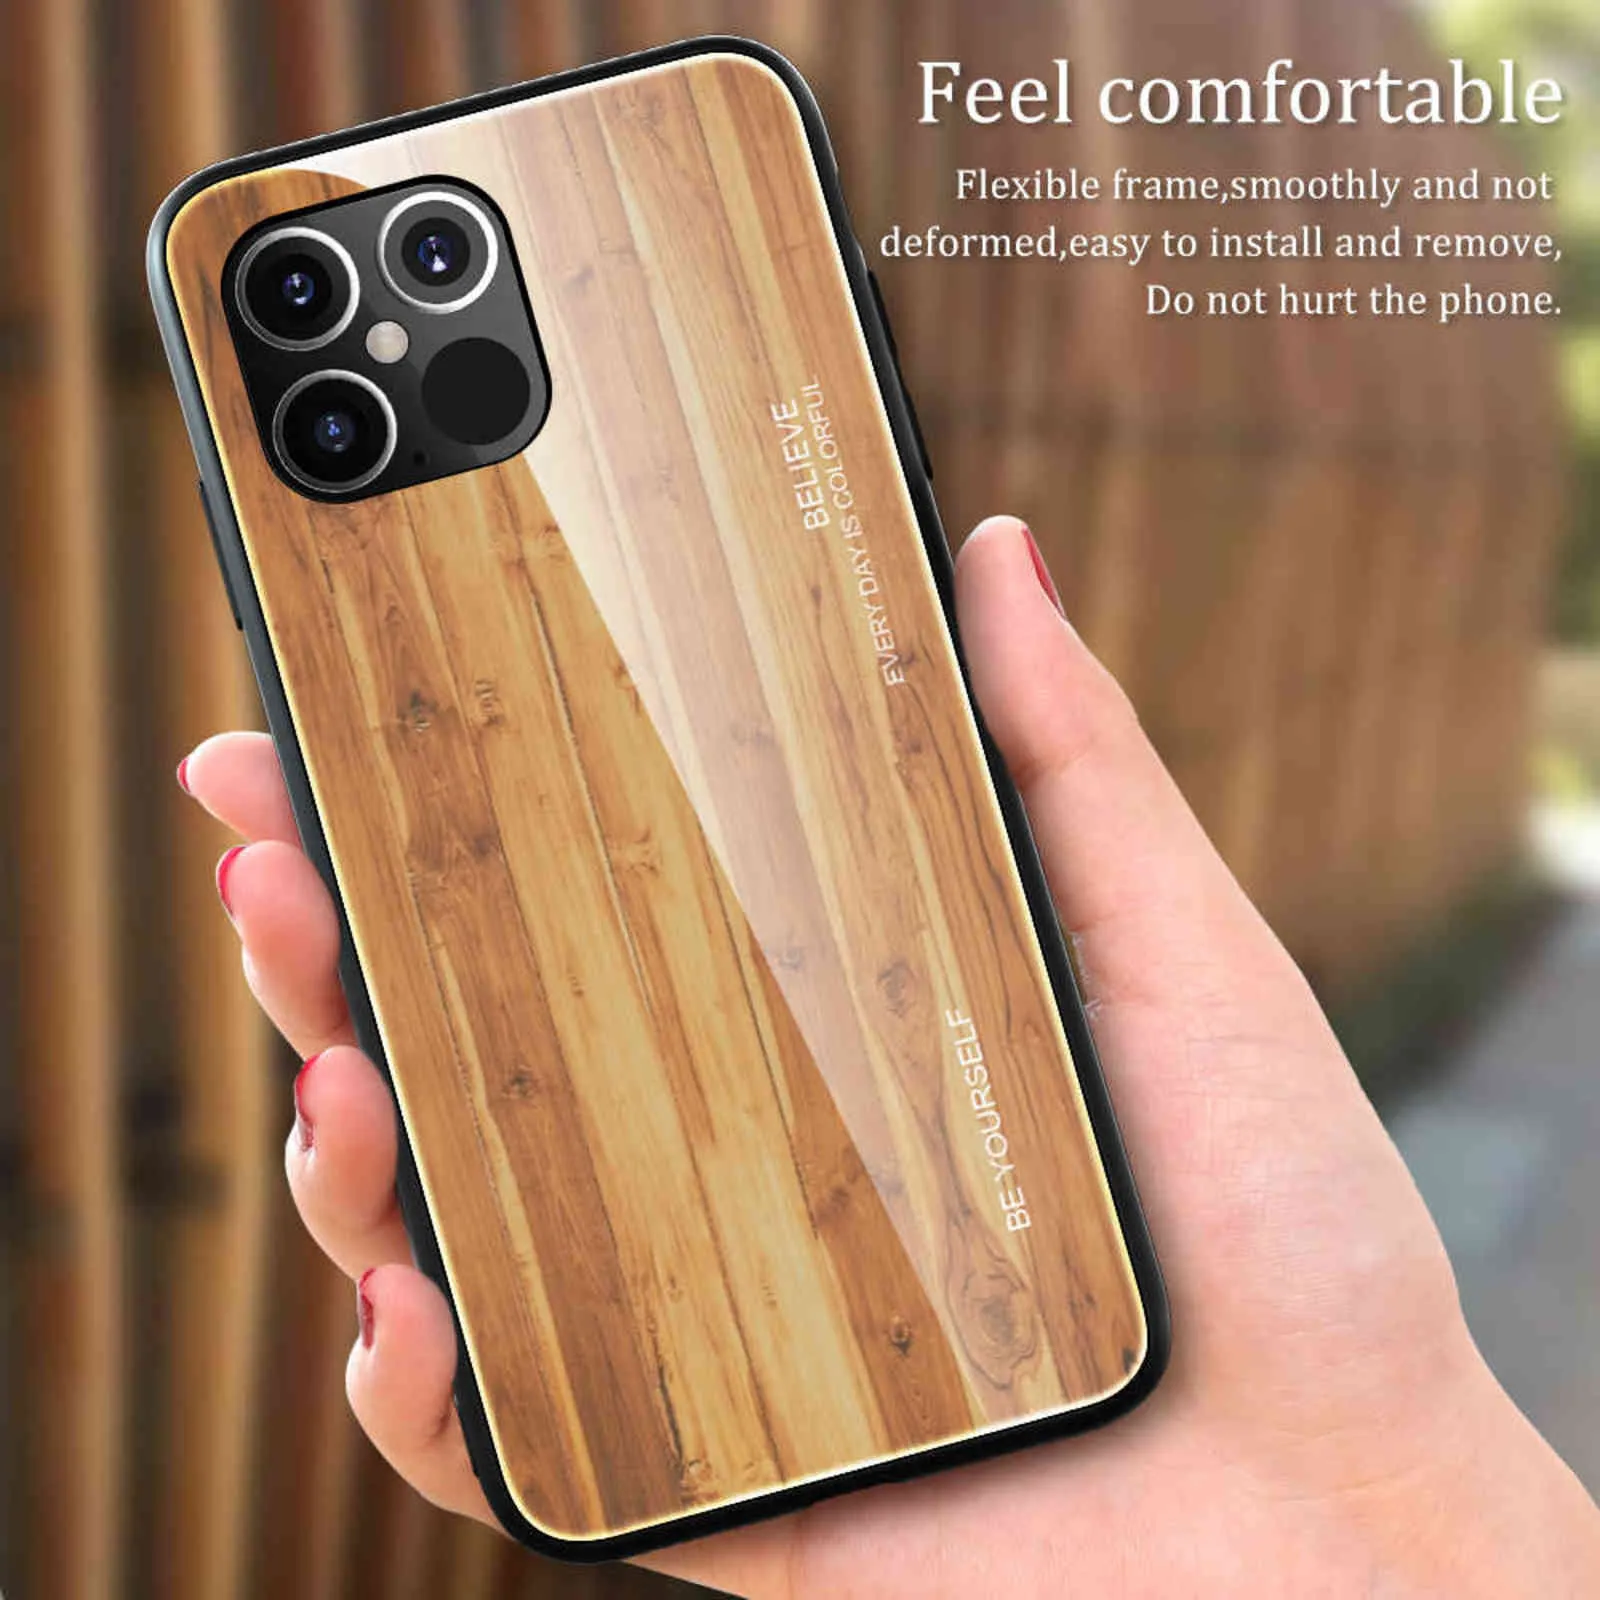 iPhone 11 12 13 Pro Max 12 Mini SE Case Tempered Glass Case for iPhone XR XS Max X 6 6S 7 8 Plus 커버 Y4568883